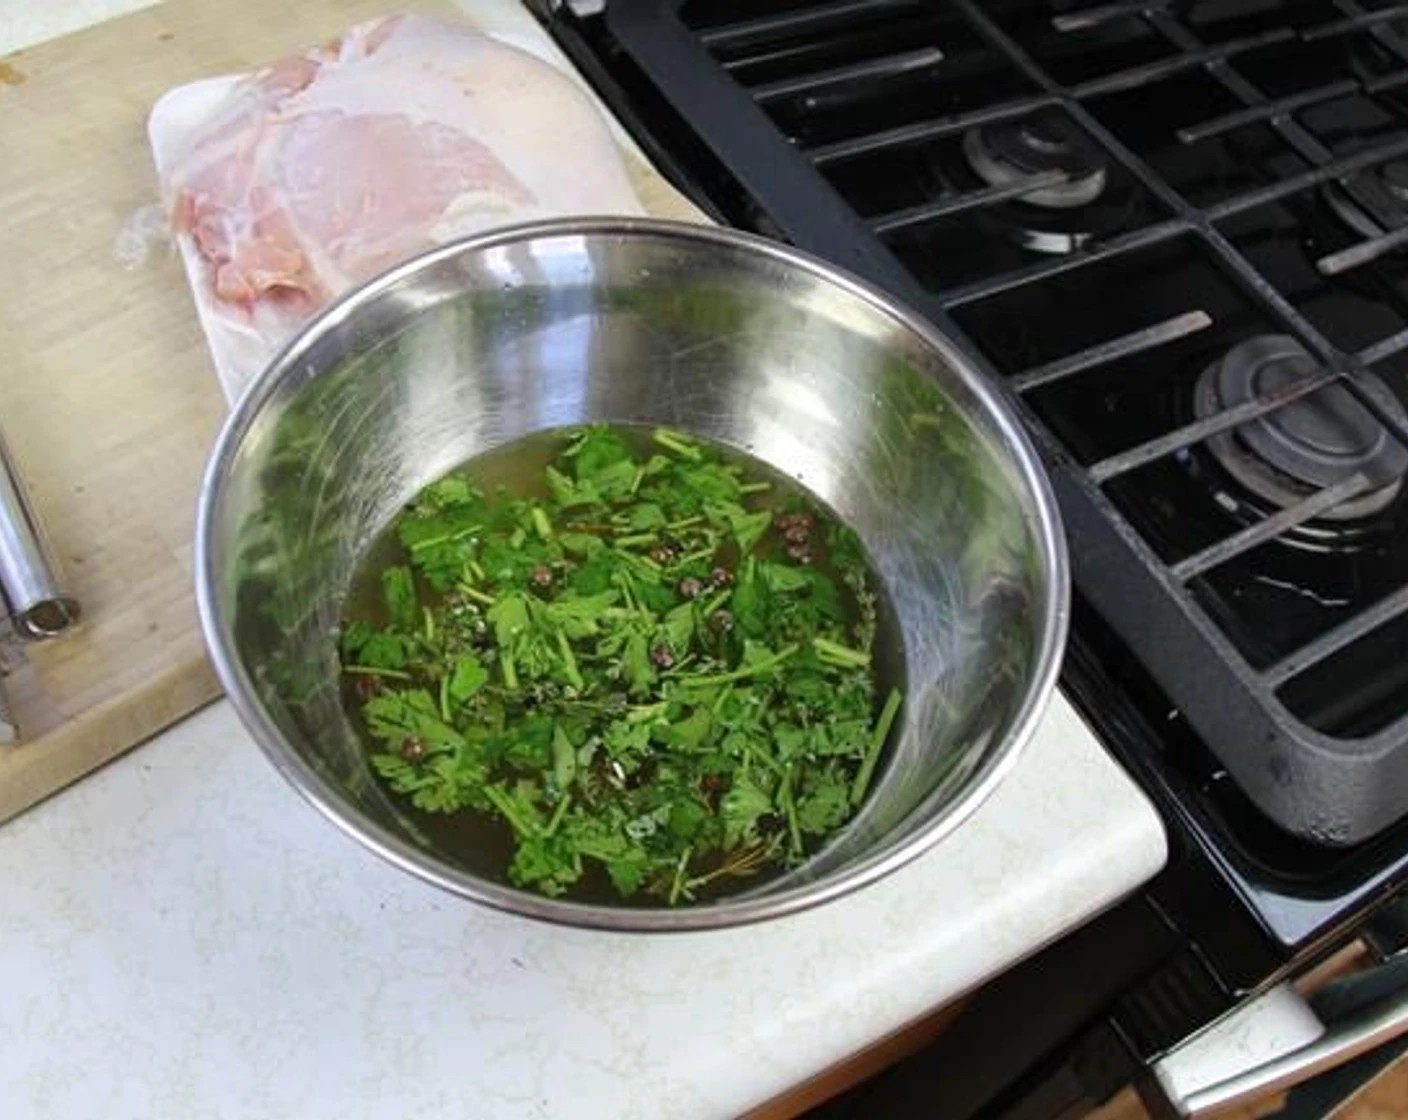 step 2 In a large bowl, place 1 cup of Water (1 cup), then add the Brown Sugar (1 Tbsp), Salt (1 Tbsp), Garlic (4 cloves), Black Peppercorns (7), Whole Allspice (5), Fresh Thyme (5 sprigs), and Fresh Parsley (2 Tbsp) and whisk. Try to be a bit rough to bruise the herbs so they release their flavors.